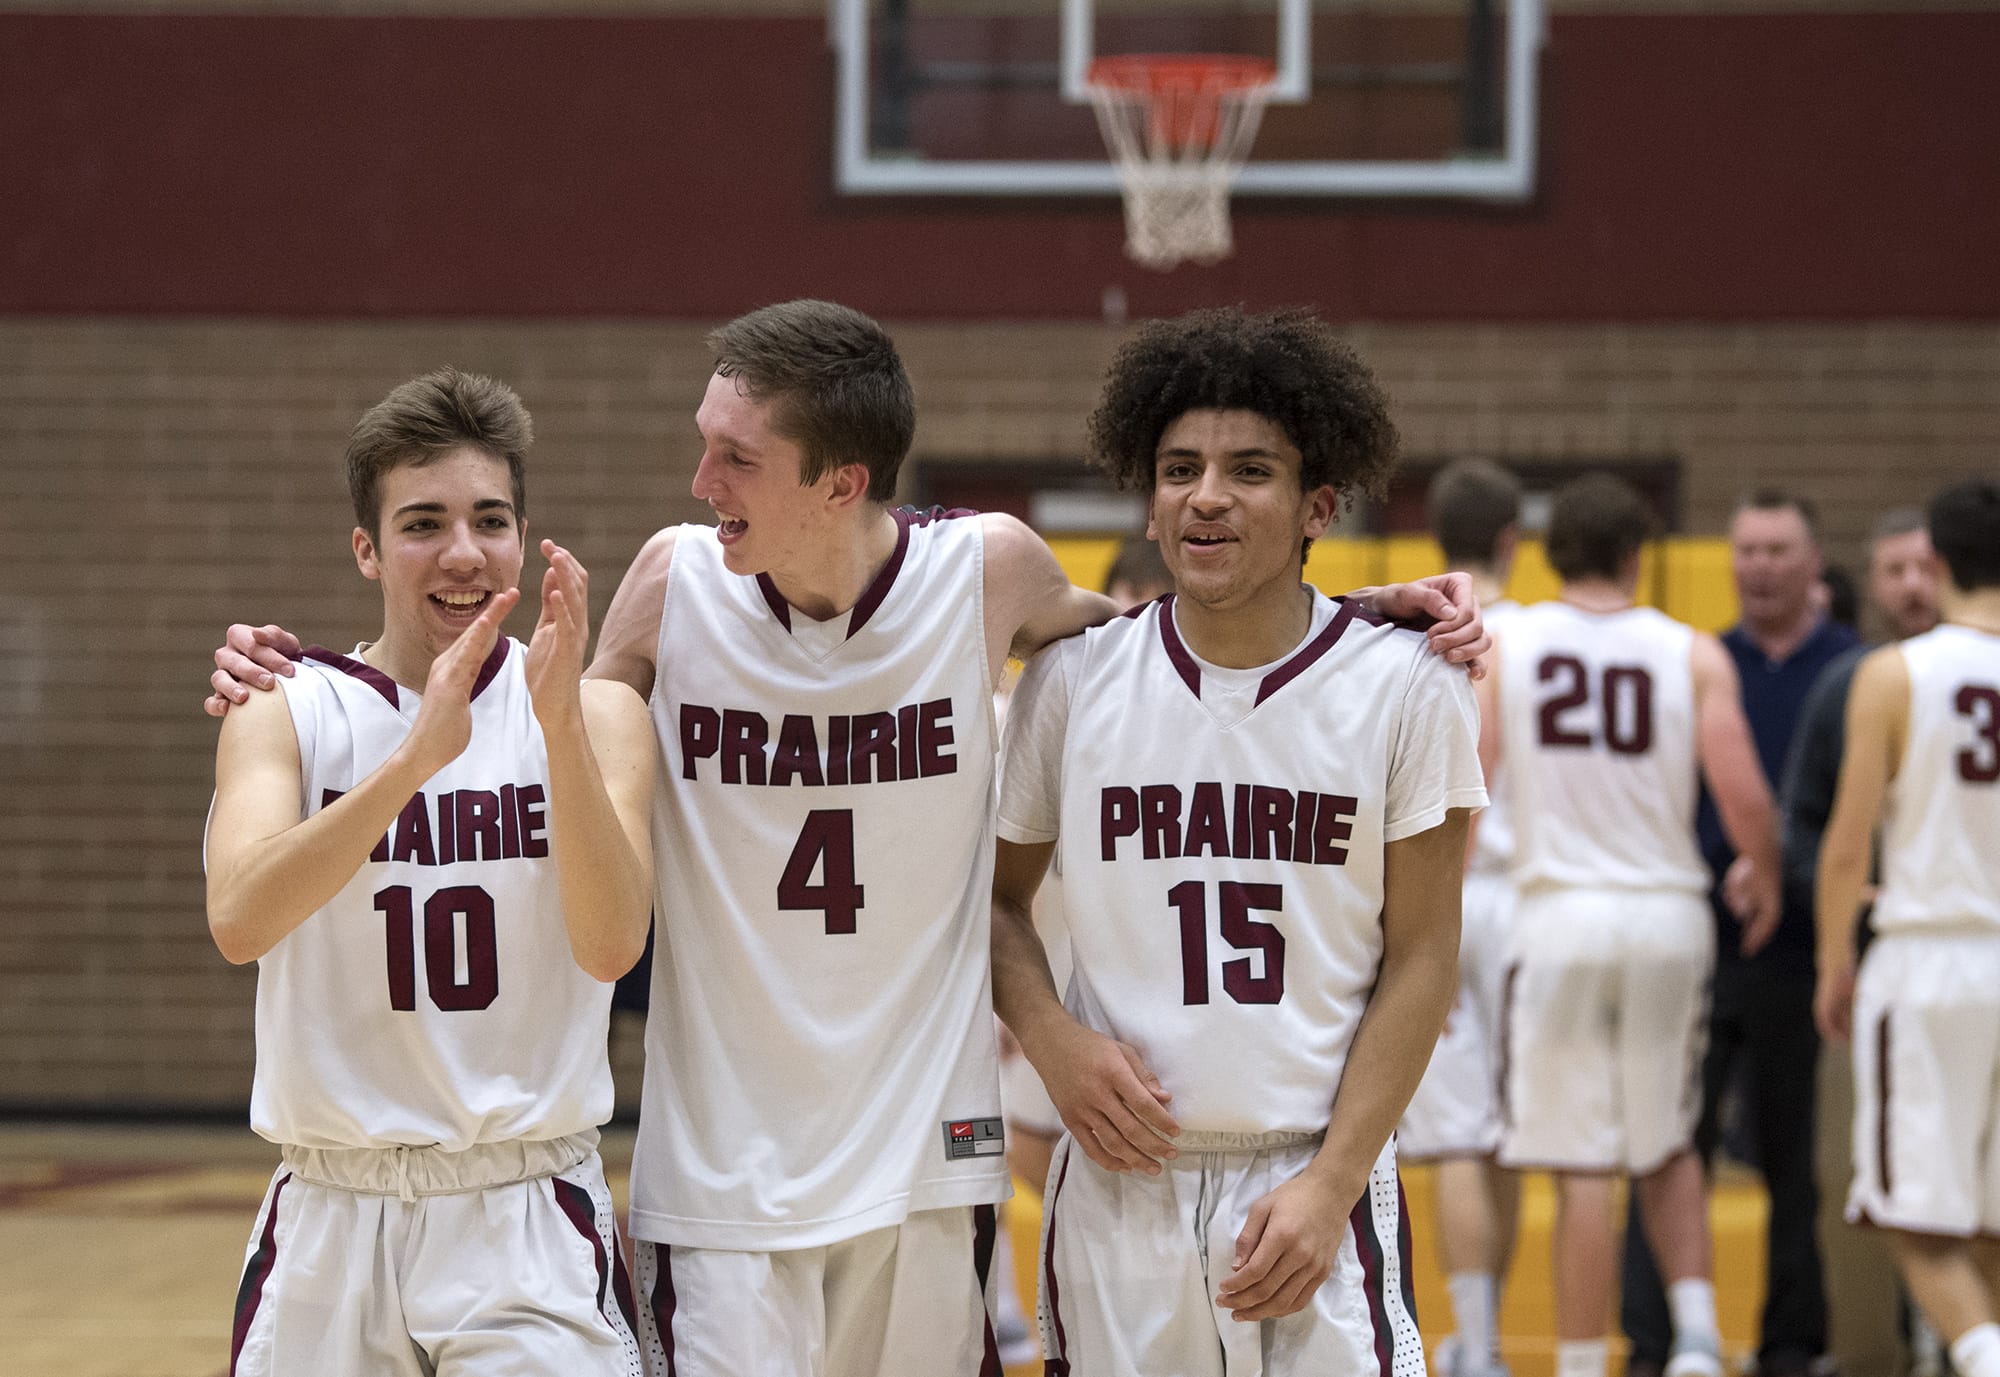 Prairie's Thomas Hapgood (10), Braiden Broadbent (4), and A.J. Dixon (15) celebrate their win after Friday night's game against Kelso at Prairie High School in Vancouver. Prairie won 64-55.